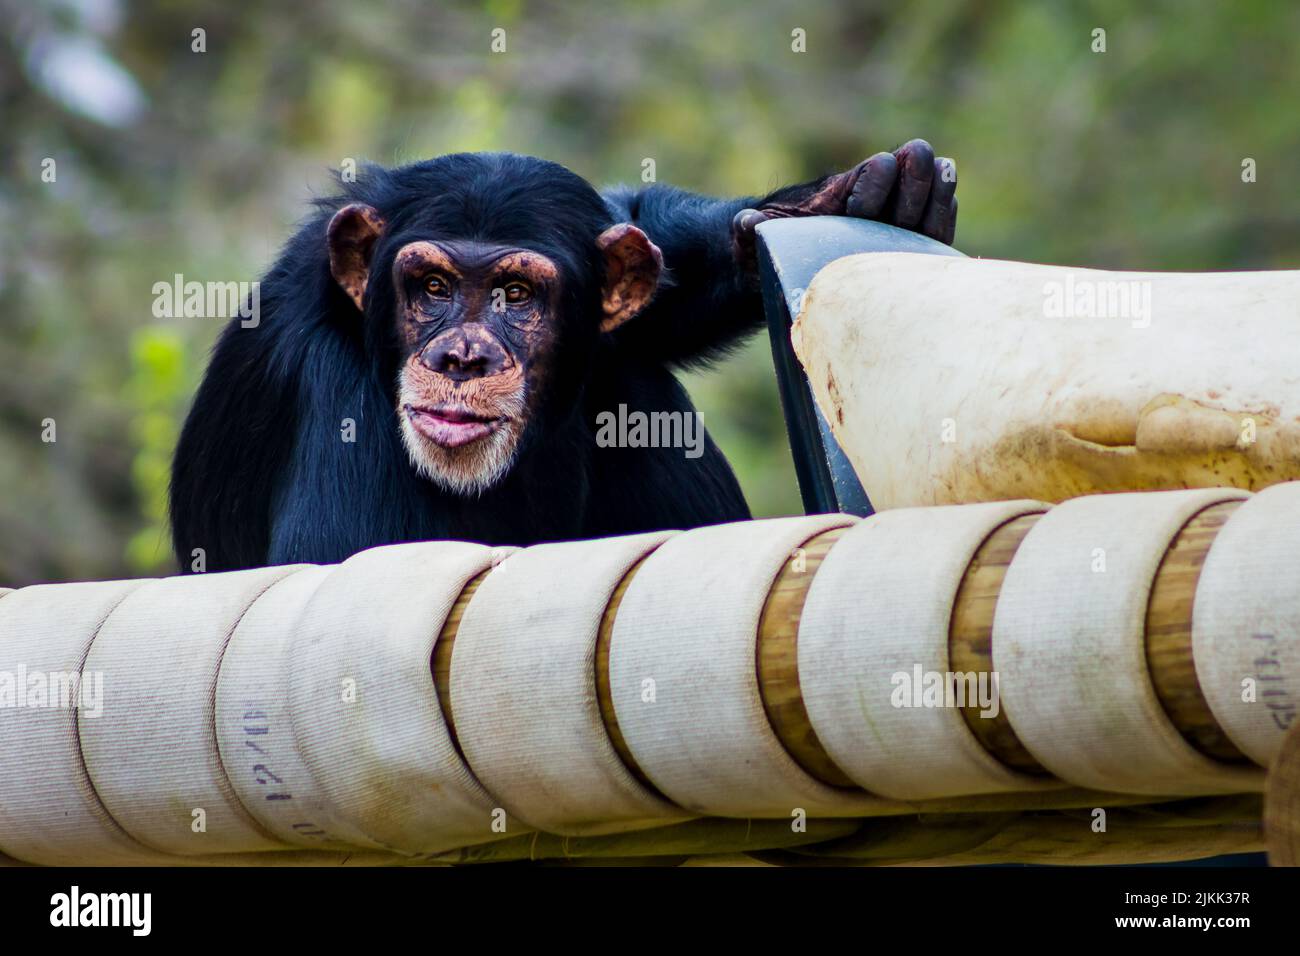 A shallow focus of a Chimpanzee,  monkey, pet animal in the zoo with blurred trees Stock Photo